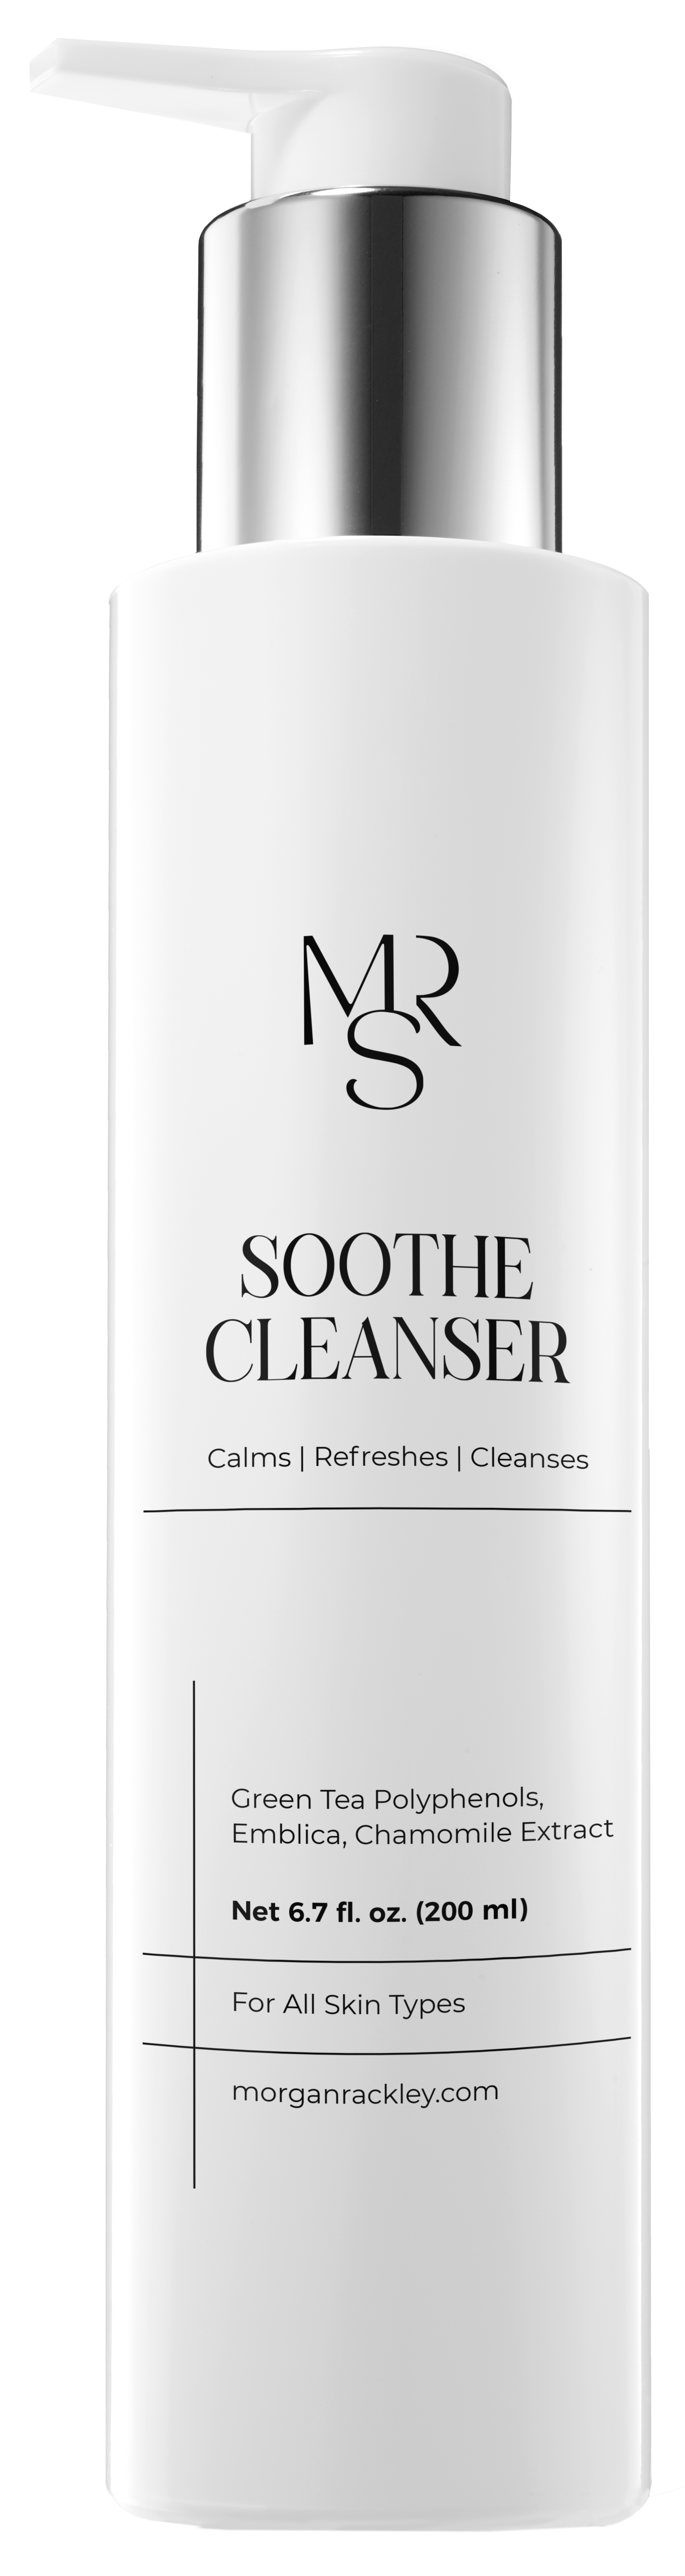 Soothe Cleanser